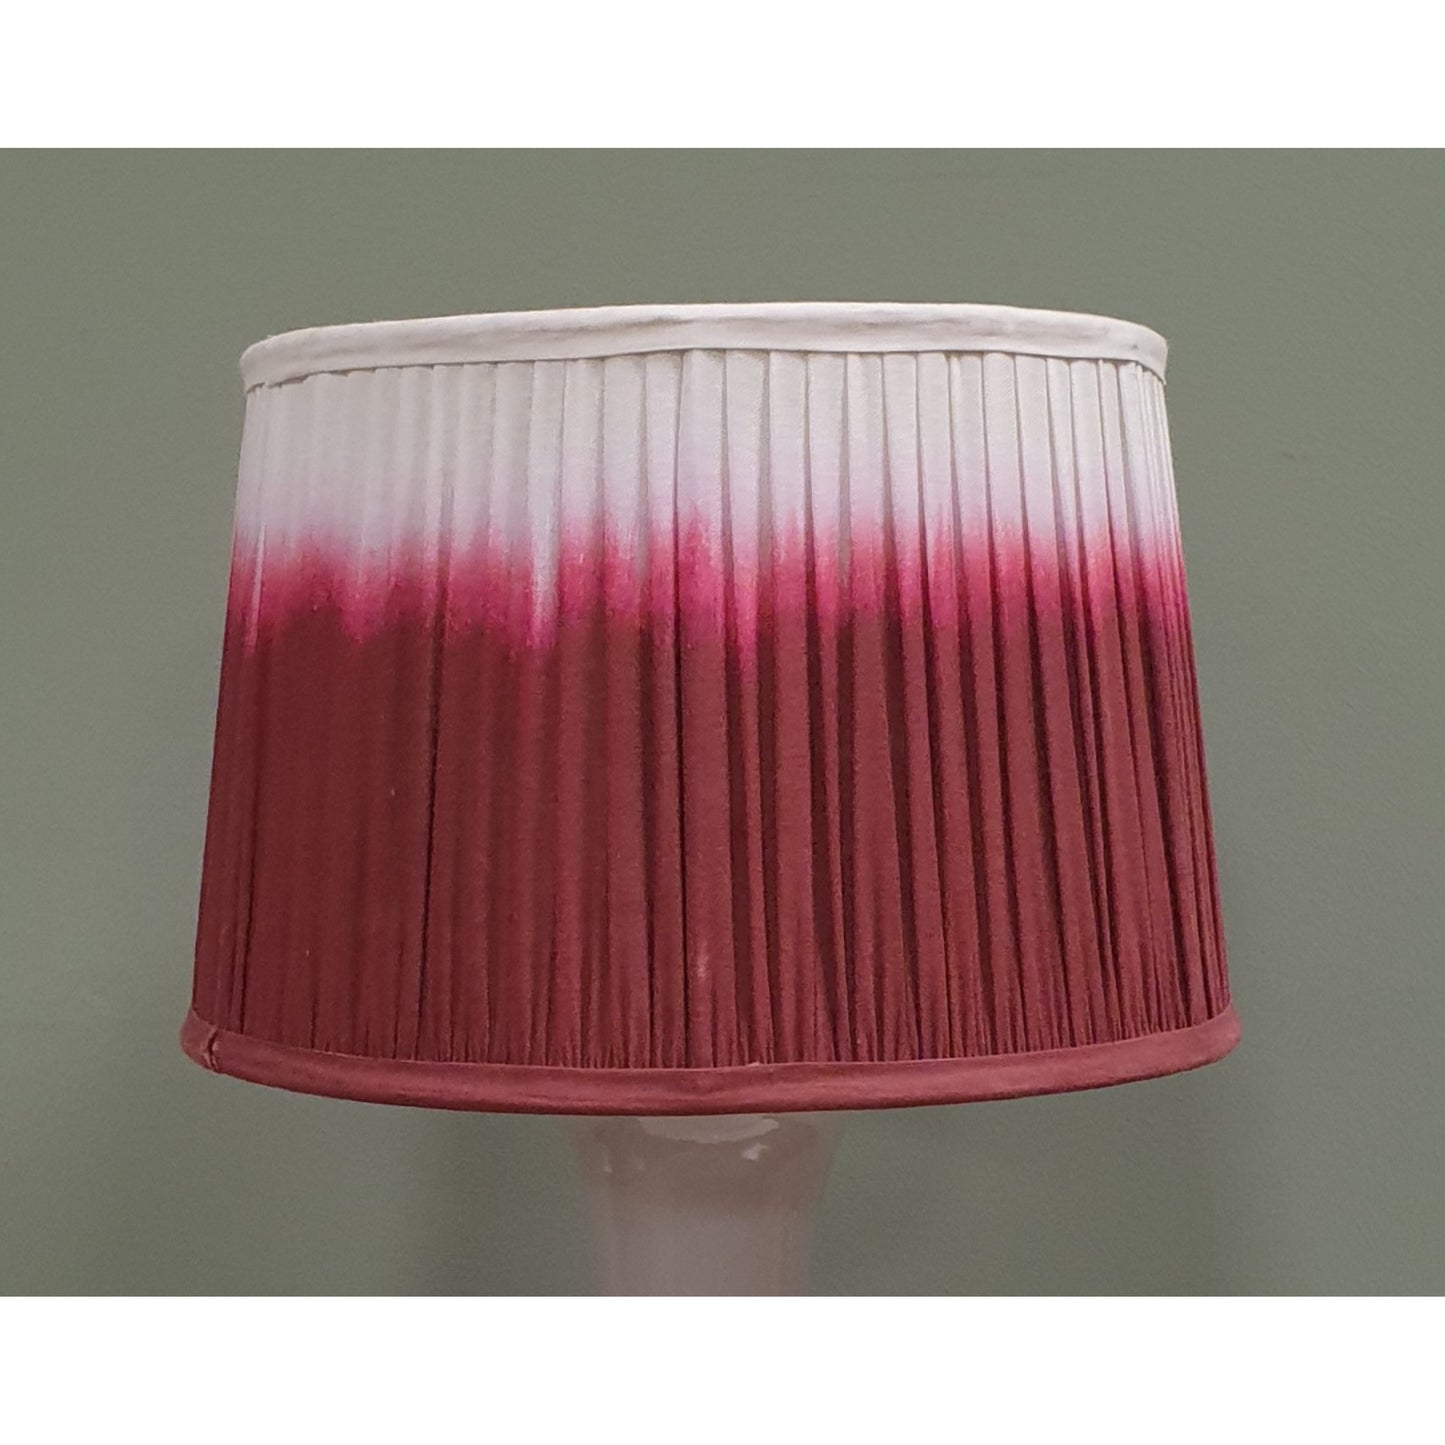 Ombré Lamp Shade - Red